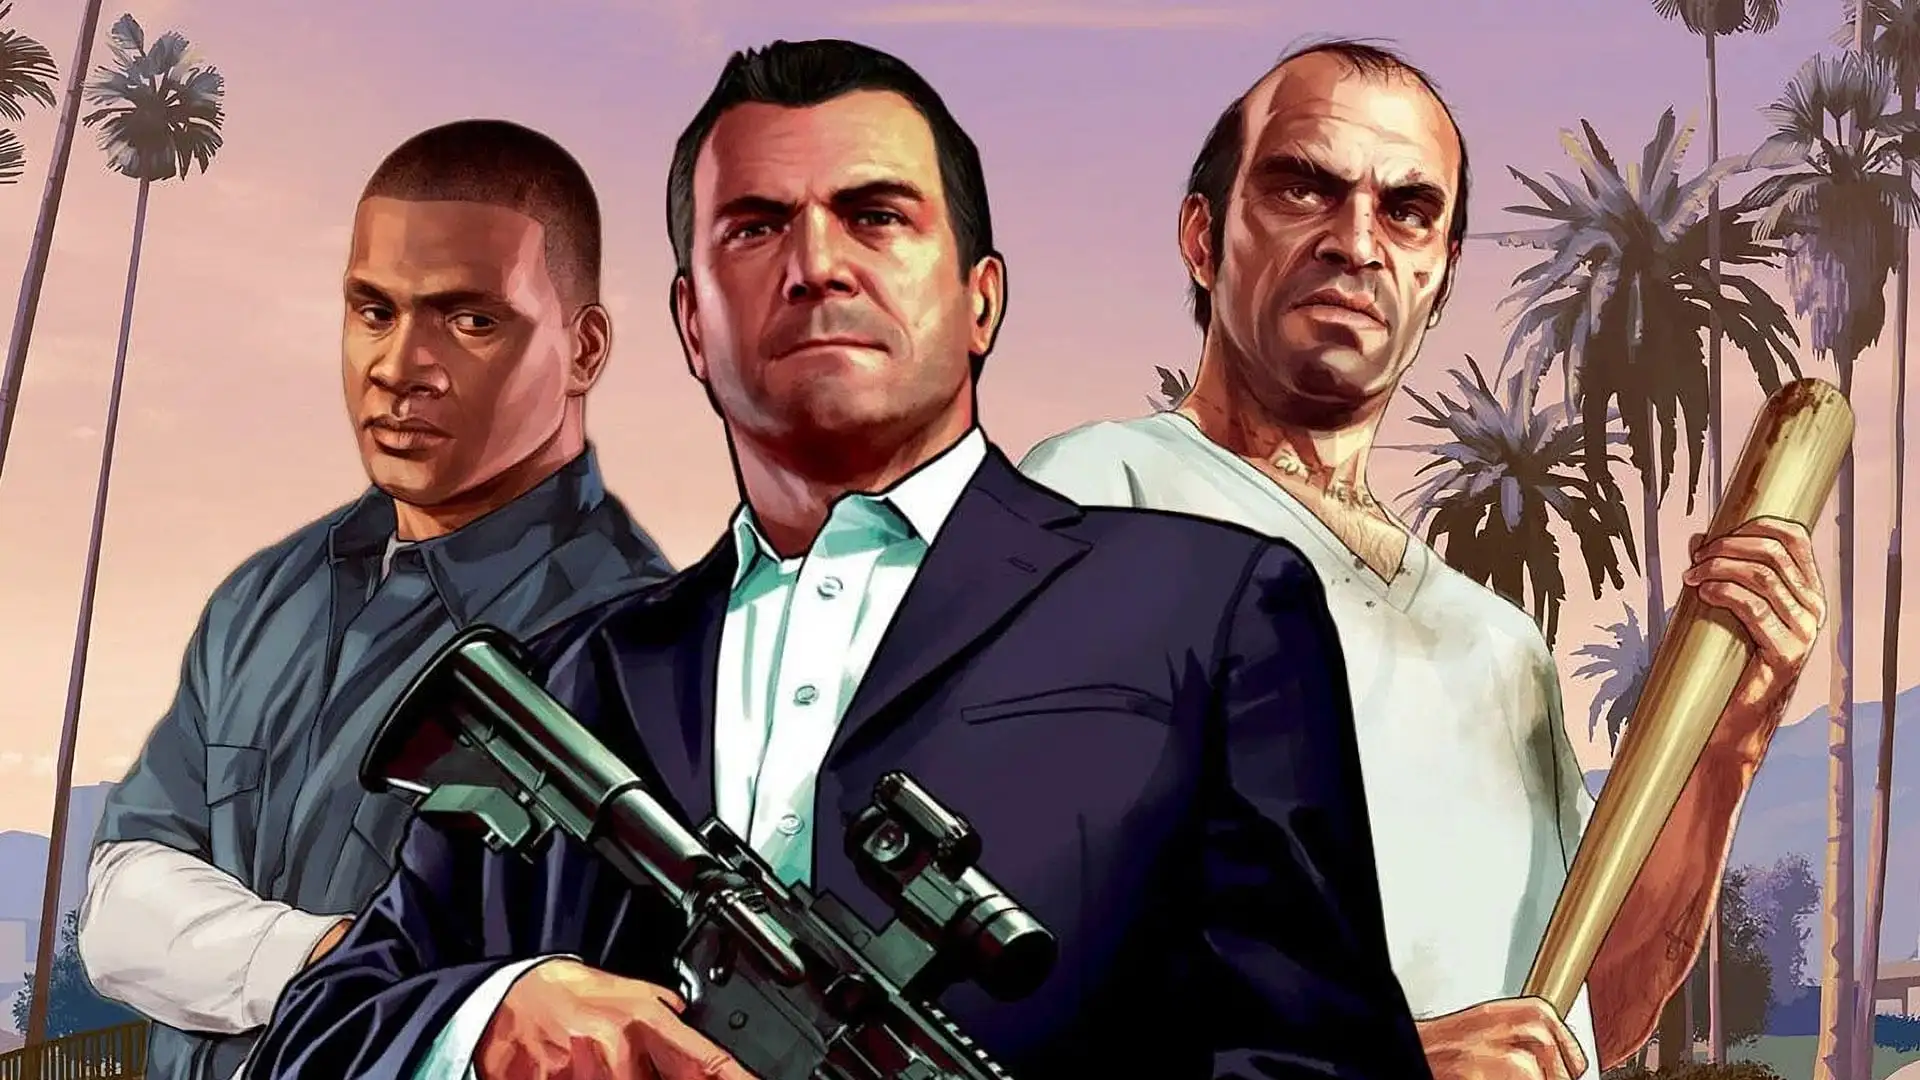 Can You Crossplay Gta 5 Xbox and Ps4?